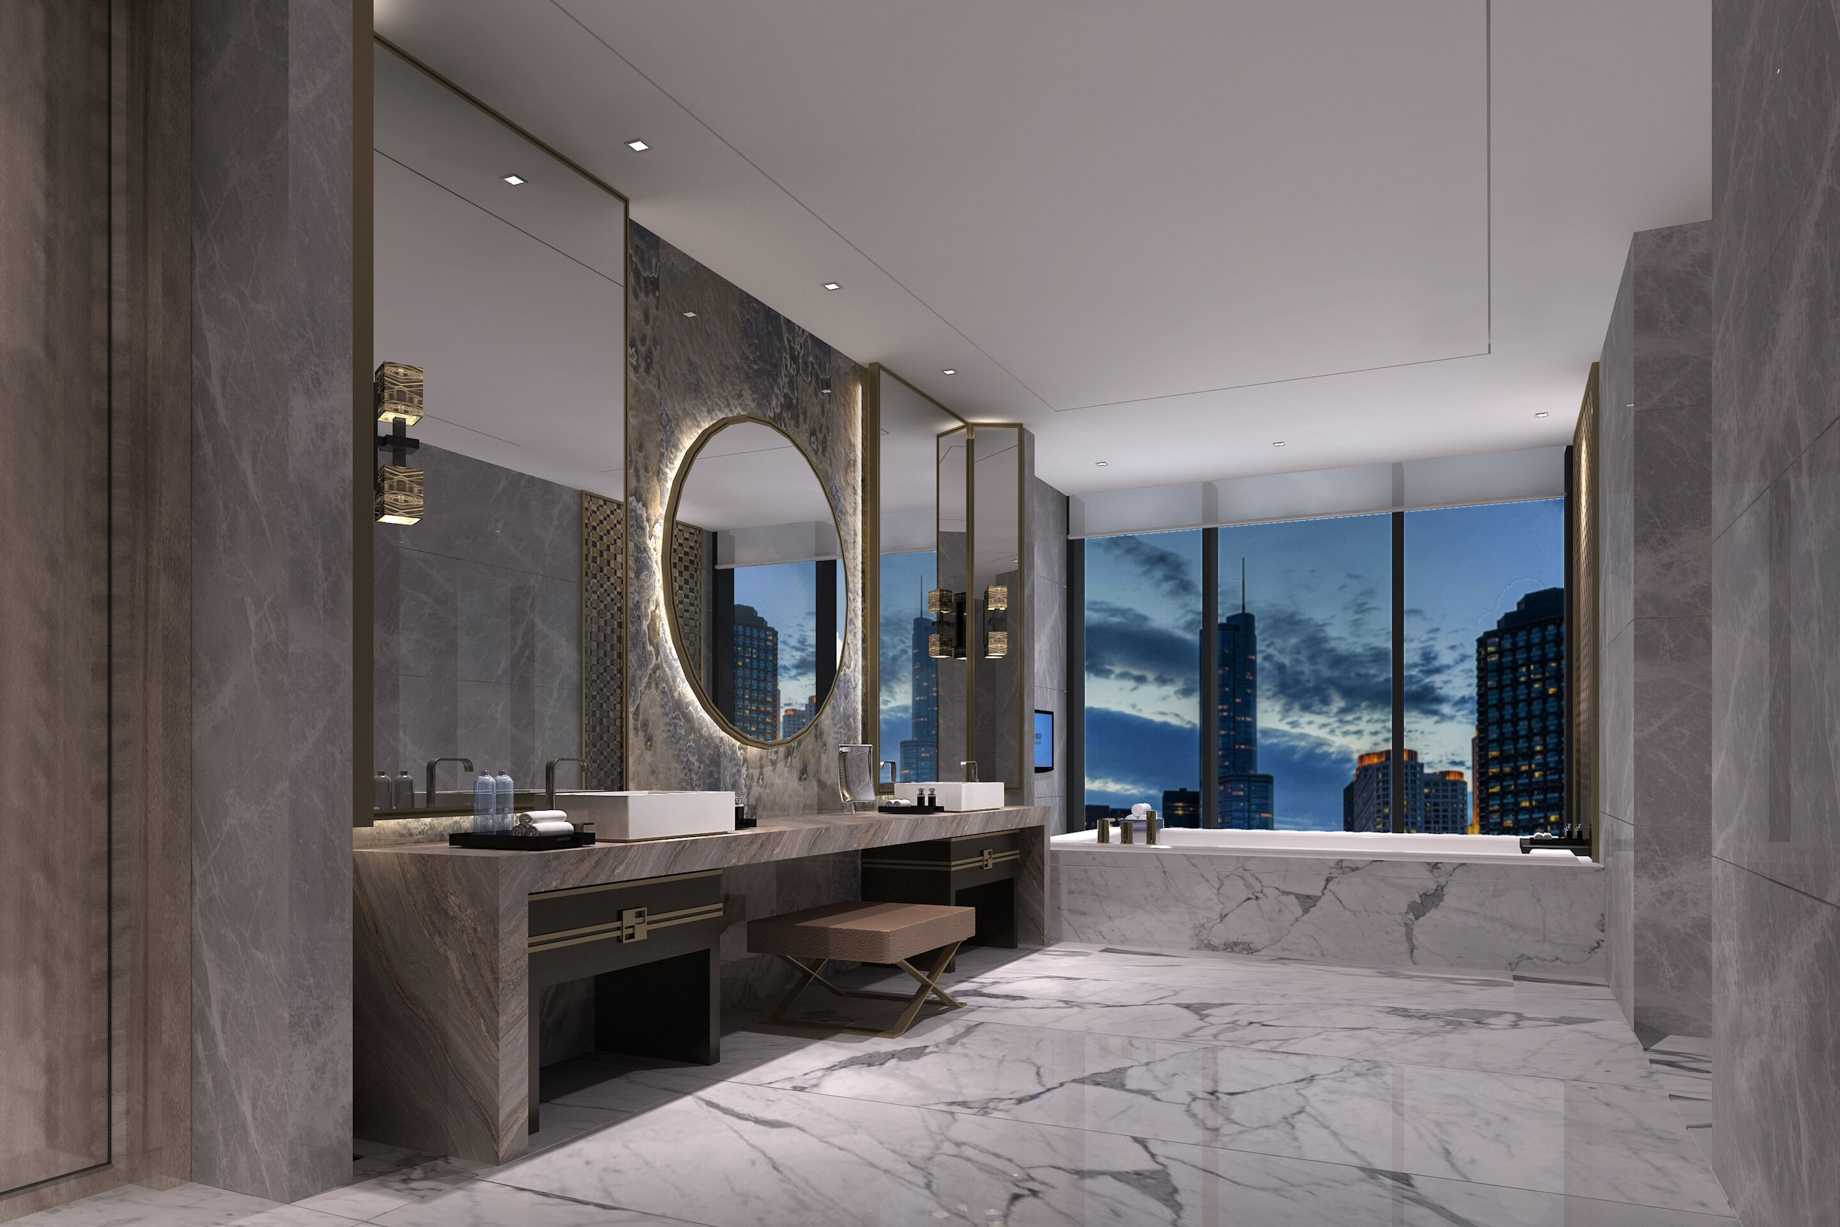 The St. Regis Chicago Hotel – Chicago, IL, USA – Presidential Suite Bathroom